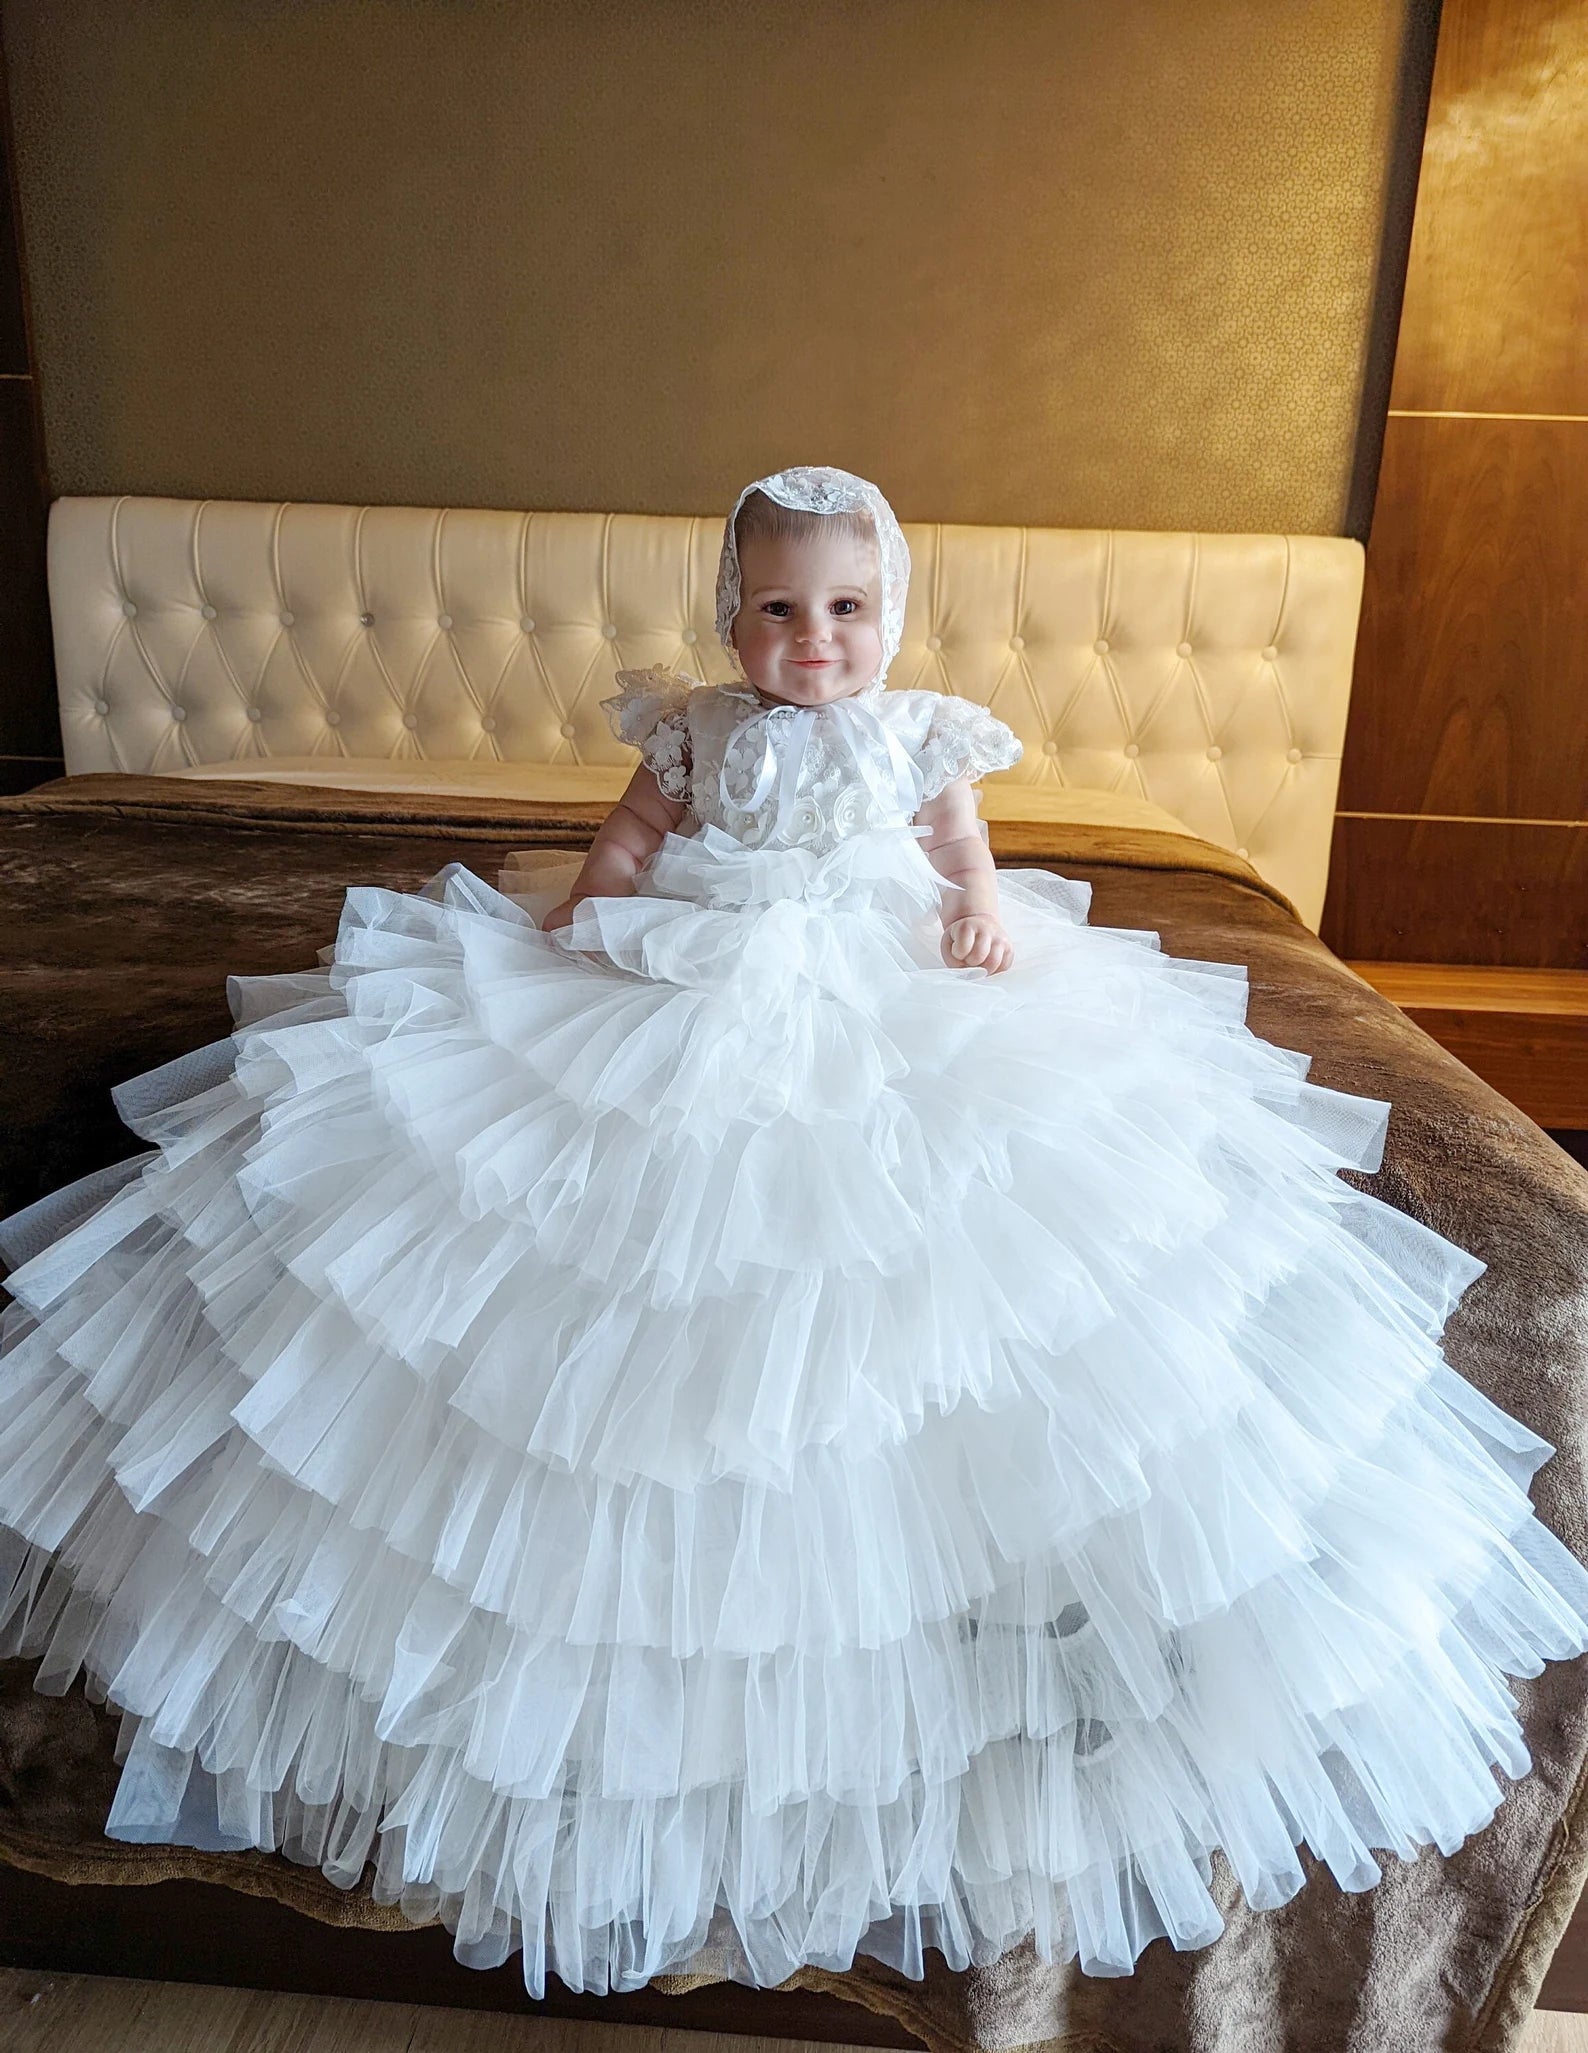 Exquisite Couture White Silk Tulle Christening Baptism Baby Gown